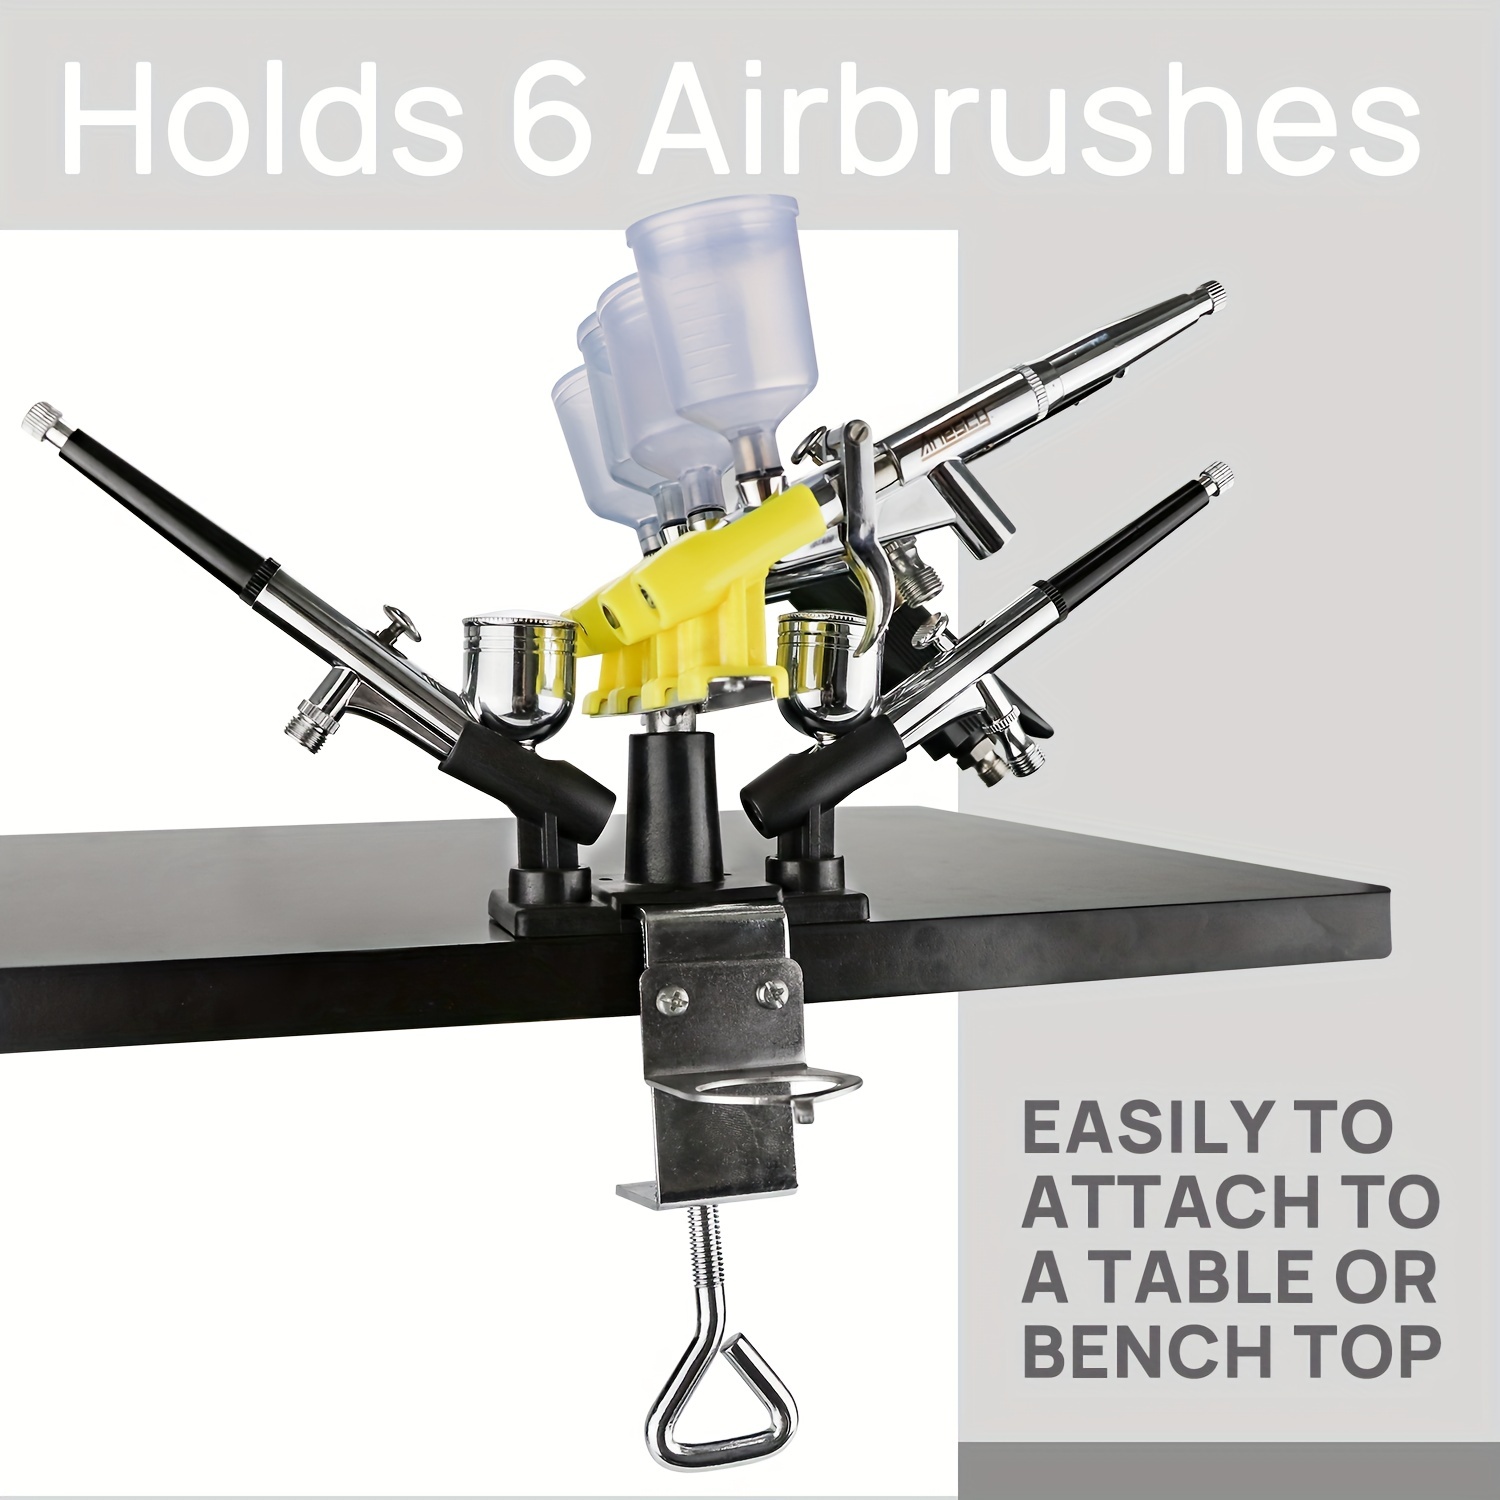 Universal Clamp-On Airbrush Holder that Holds Up to 6 Airbrushes, 6  Airbrush Holder - Fred Meyer